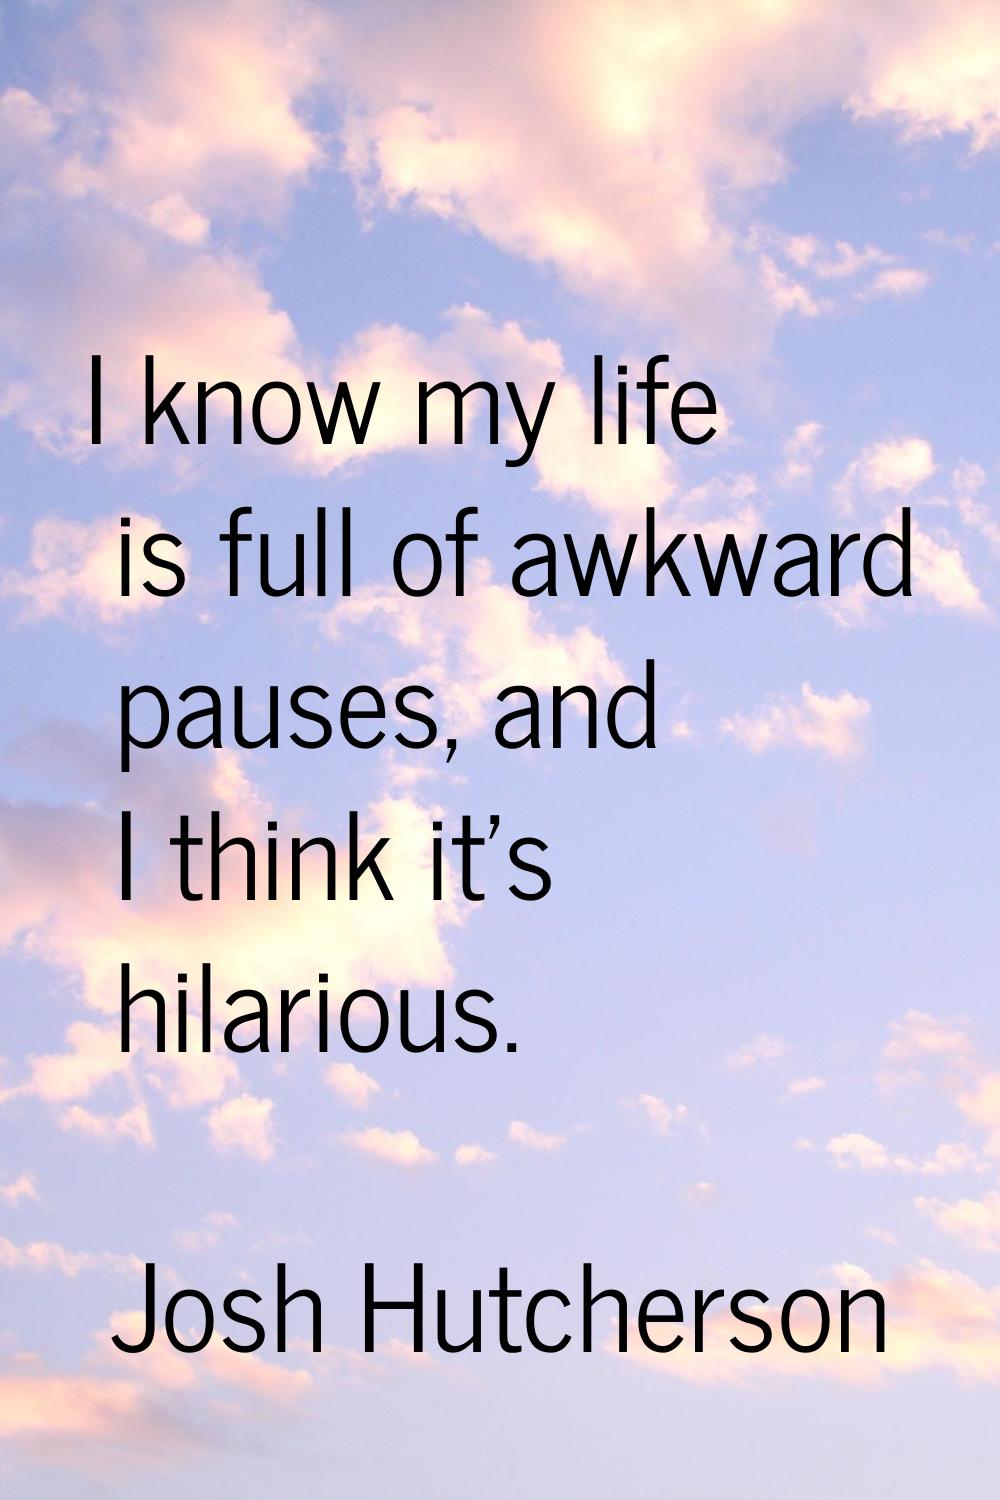 I know my life is full of awkward pauses, and I think it's hilarious.